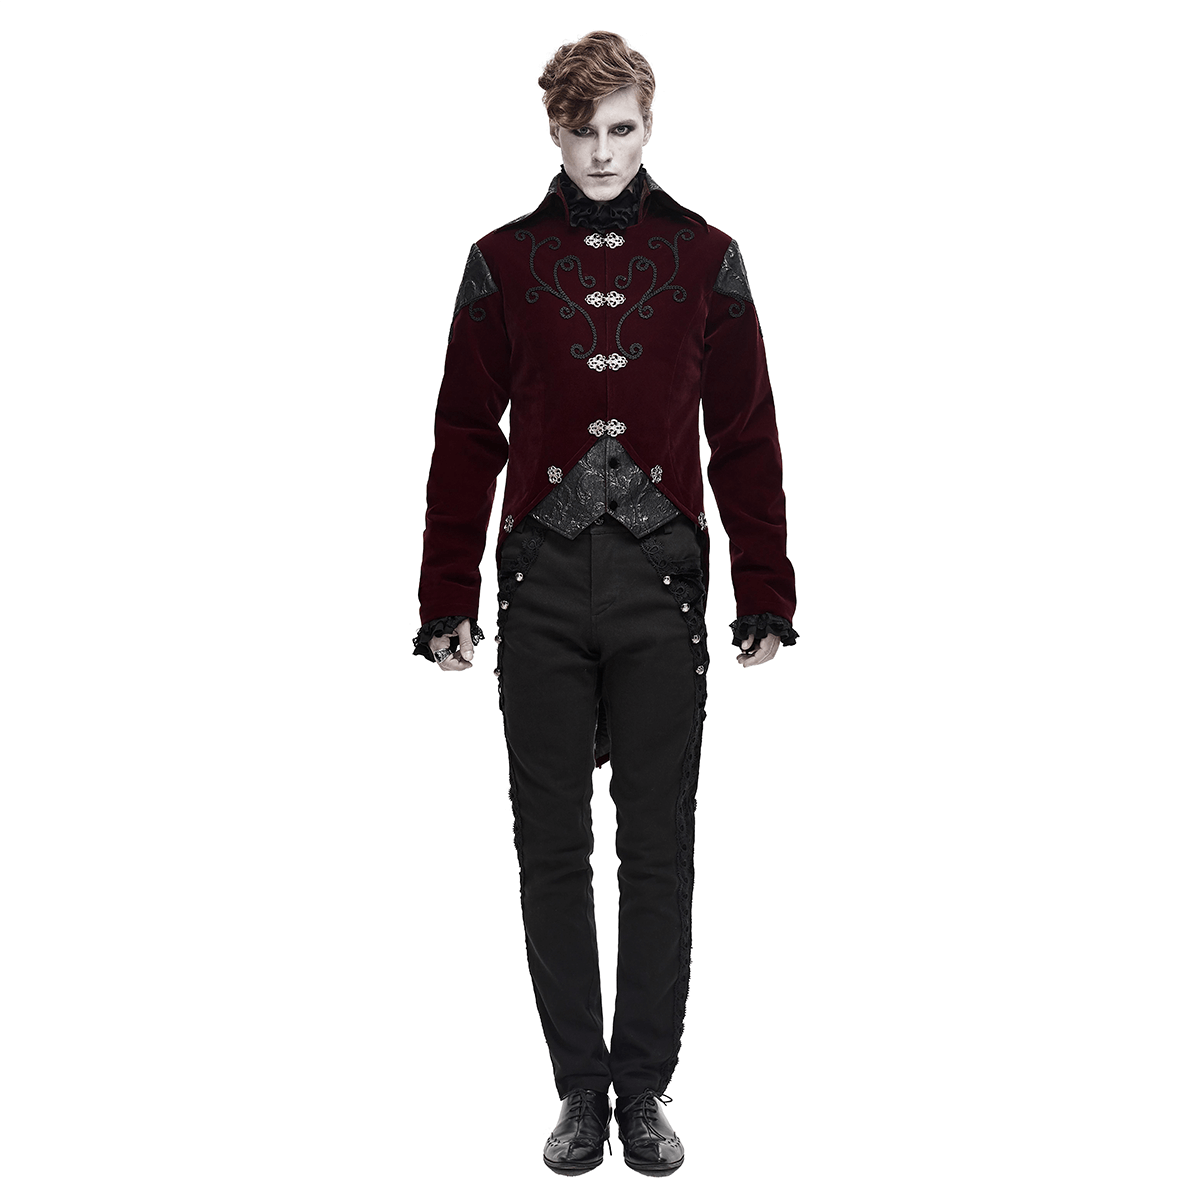 Gothic Wine Red Tailcoat with Patchwork Design / Steampunk Style Flip Collar Coats - HARD'N'HEAVY